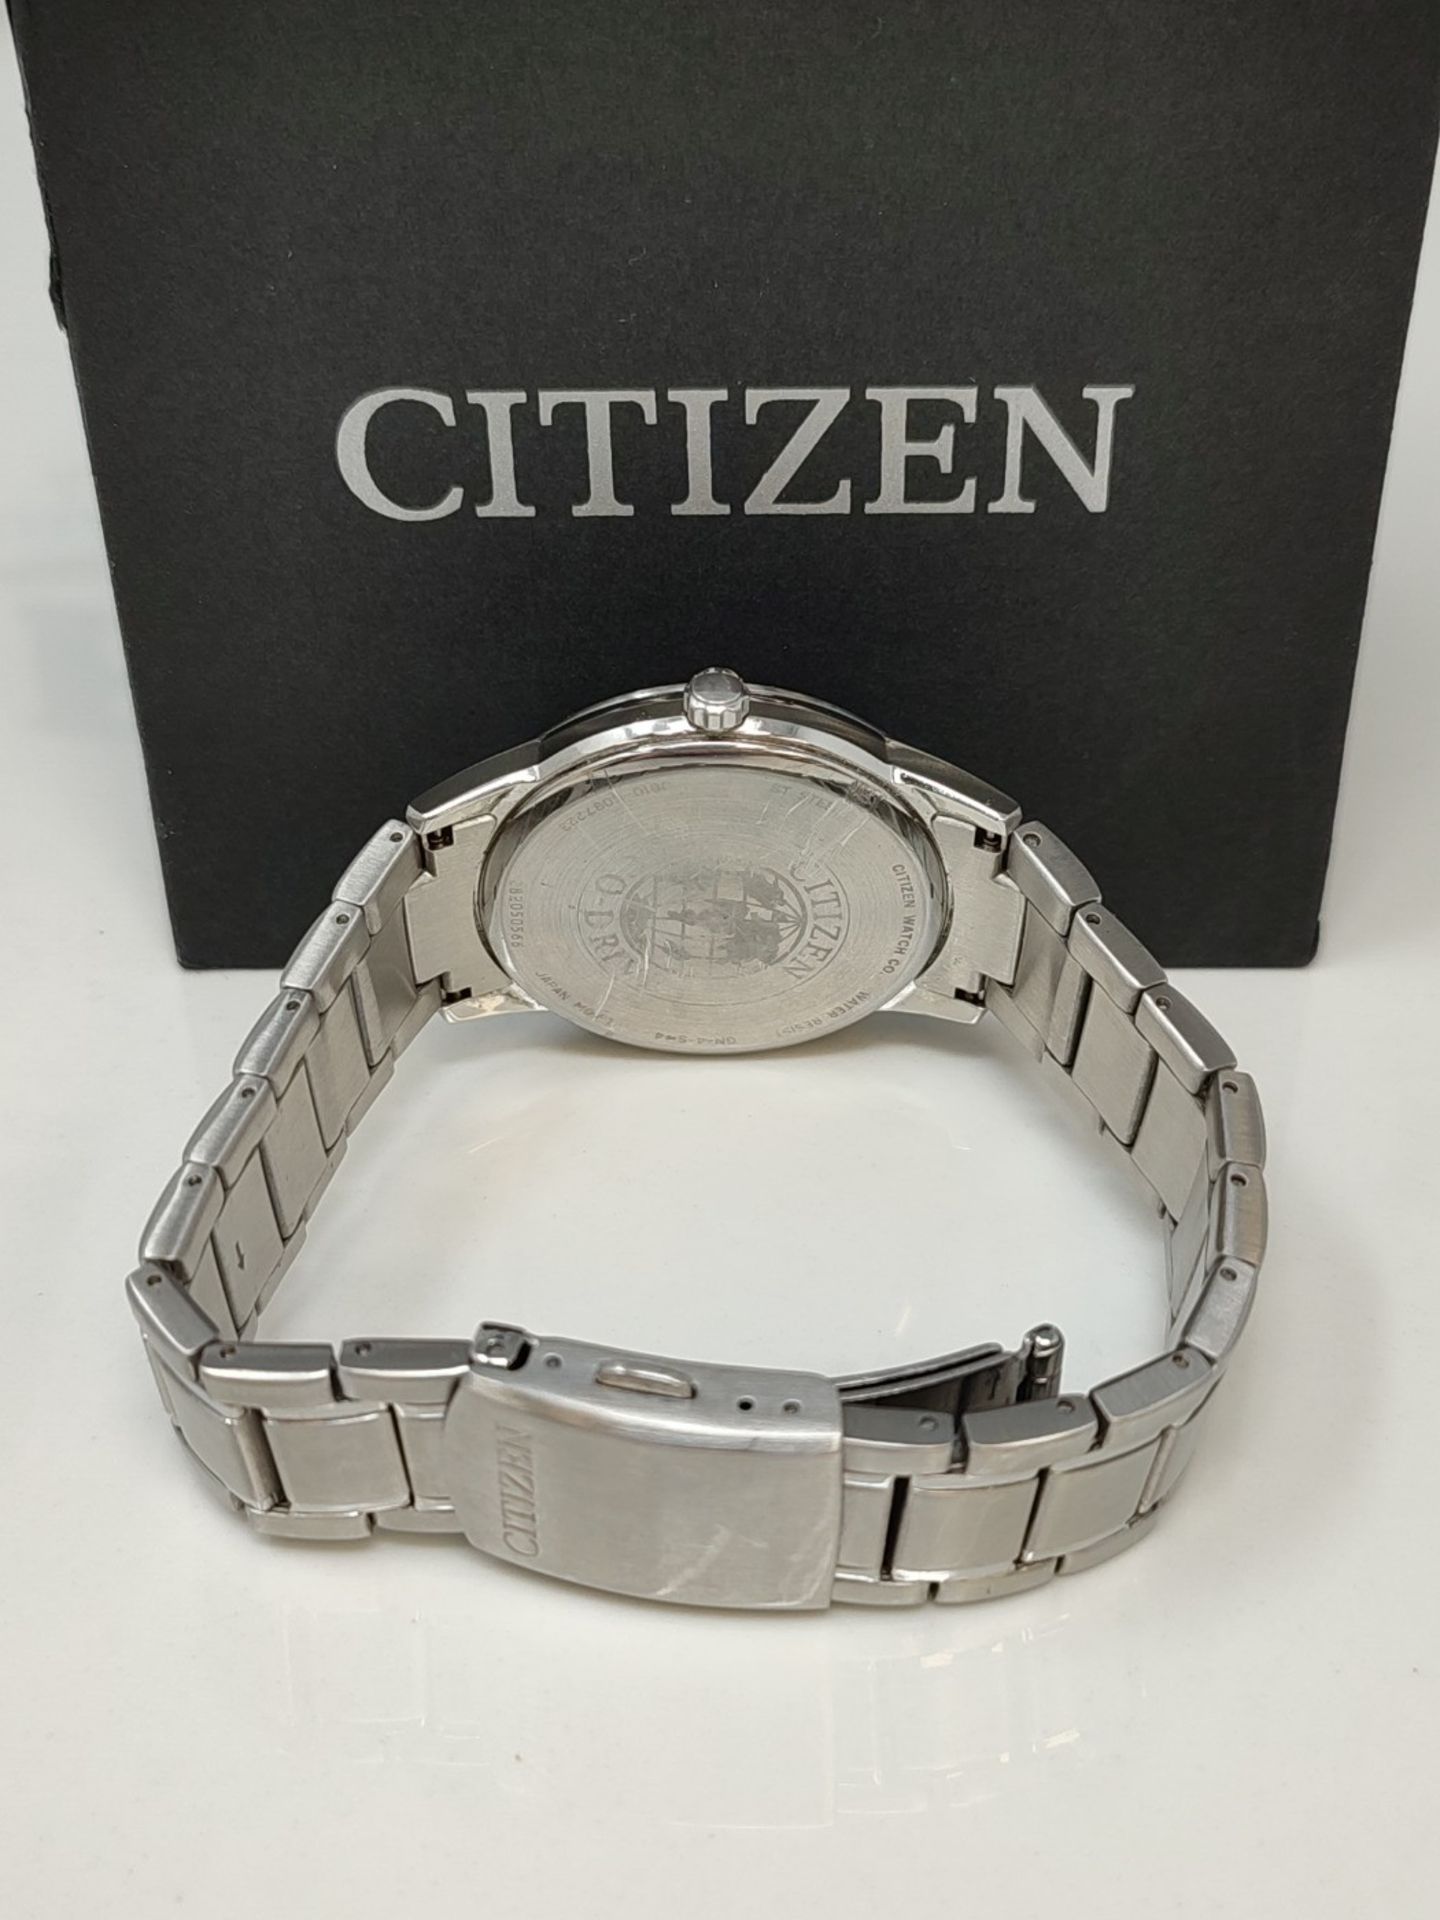 RRP £117.00 CITIZEN Men's Analog Quartz Watch with Stainless Steel Bracelet AW1231-07E, Black - Image 3 of 3